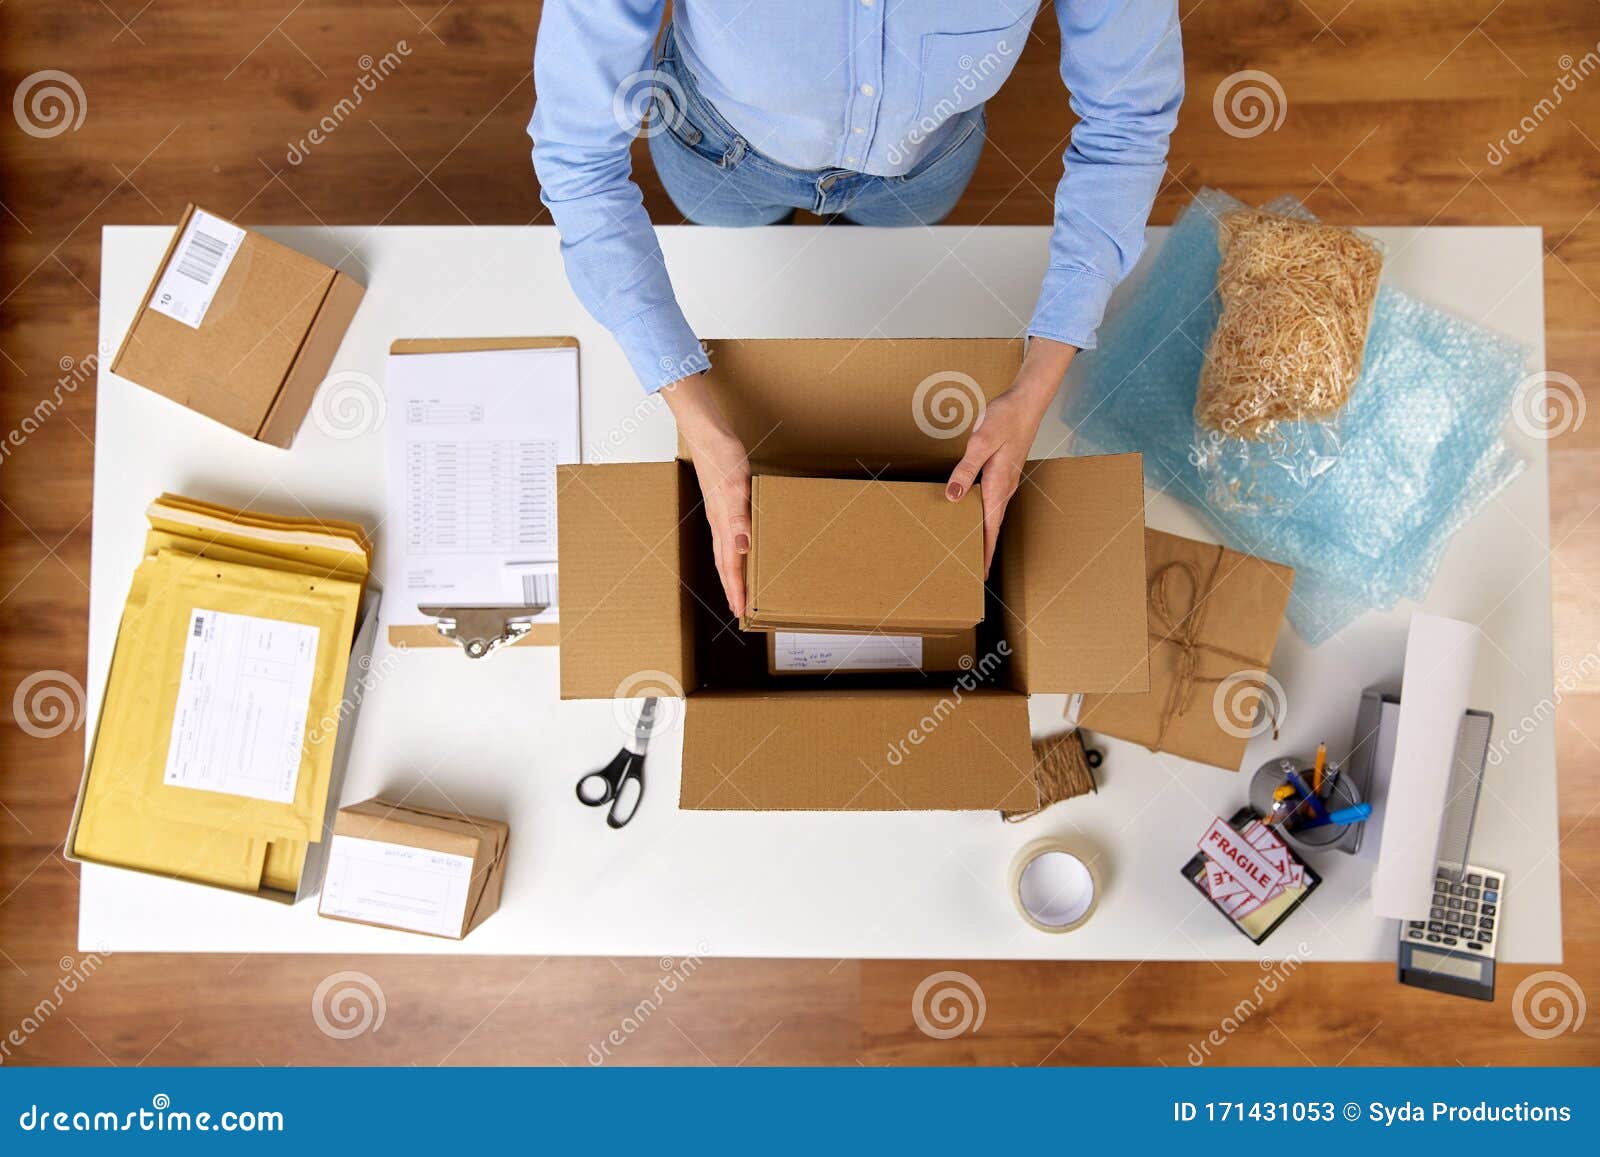 Woman Packing Fragile Parcel Boxes at Post Office Stock Image - Image of  mail, indoors: 171431053